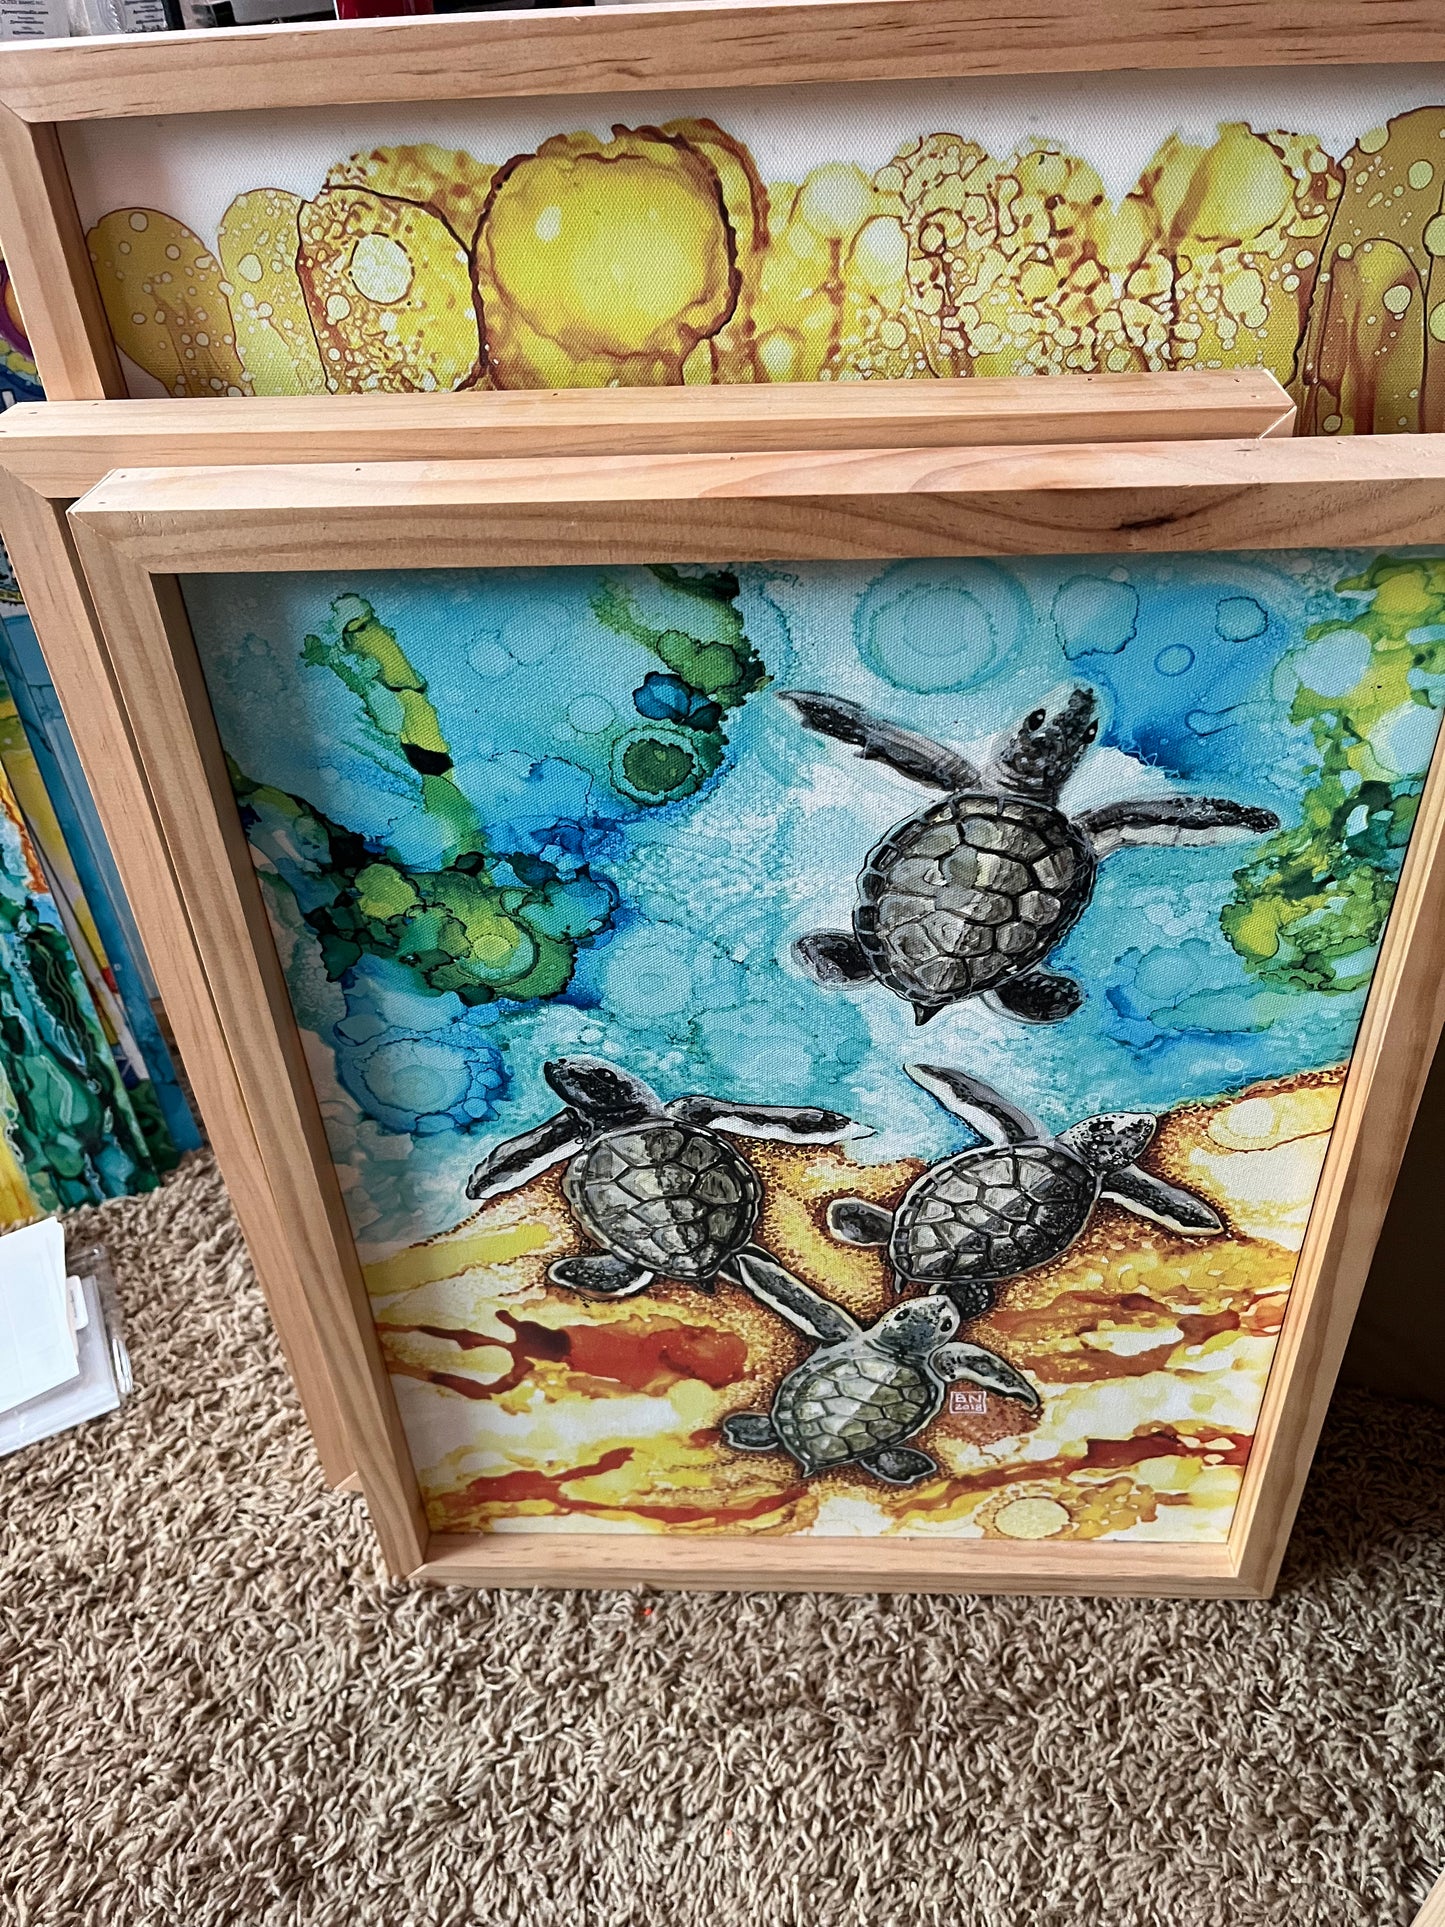 Baby Sea Turtles Entering the Ocean Canvas16" x 22" Baby Turtles Canvas Wood Framed Print of original alcohol ink painting by Barbara Newsome.  If you are a sea turtle fan, you will love this canvas print depicting 4 baby sea turtle hatch-lings making their way to the ocean and future. The painting was created using alcohol inks and pens. The print is framed with natural pine wood.. Barbara Newsome OBX Artist